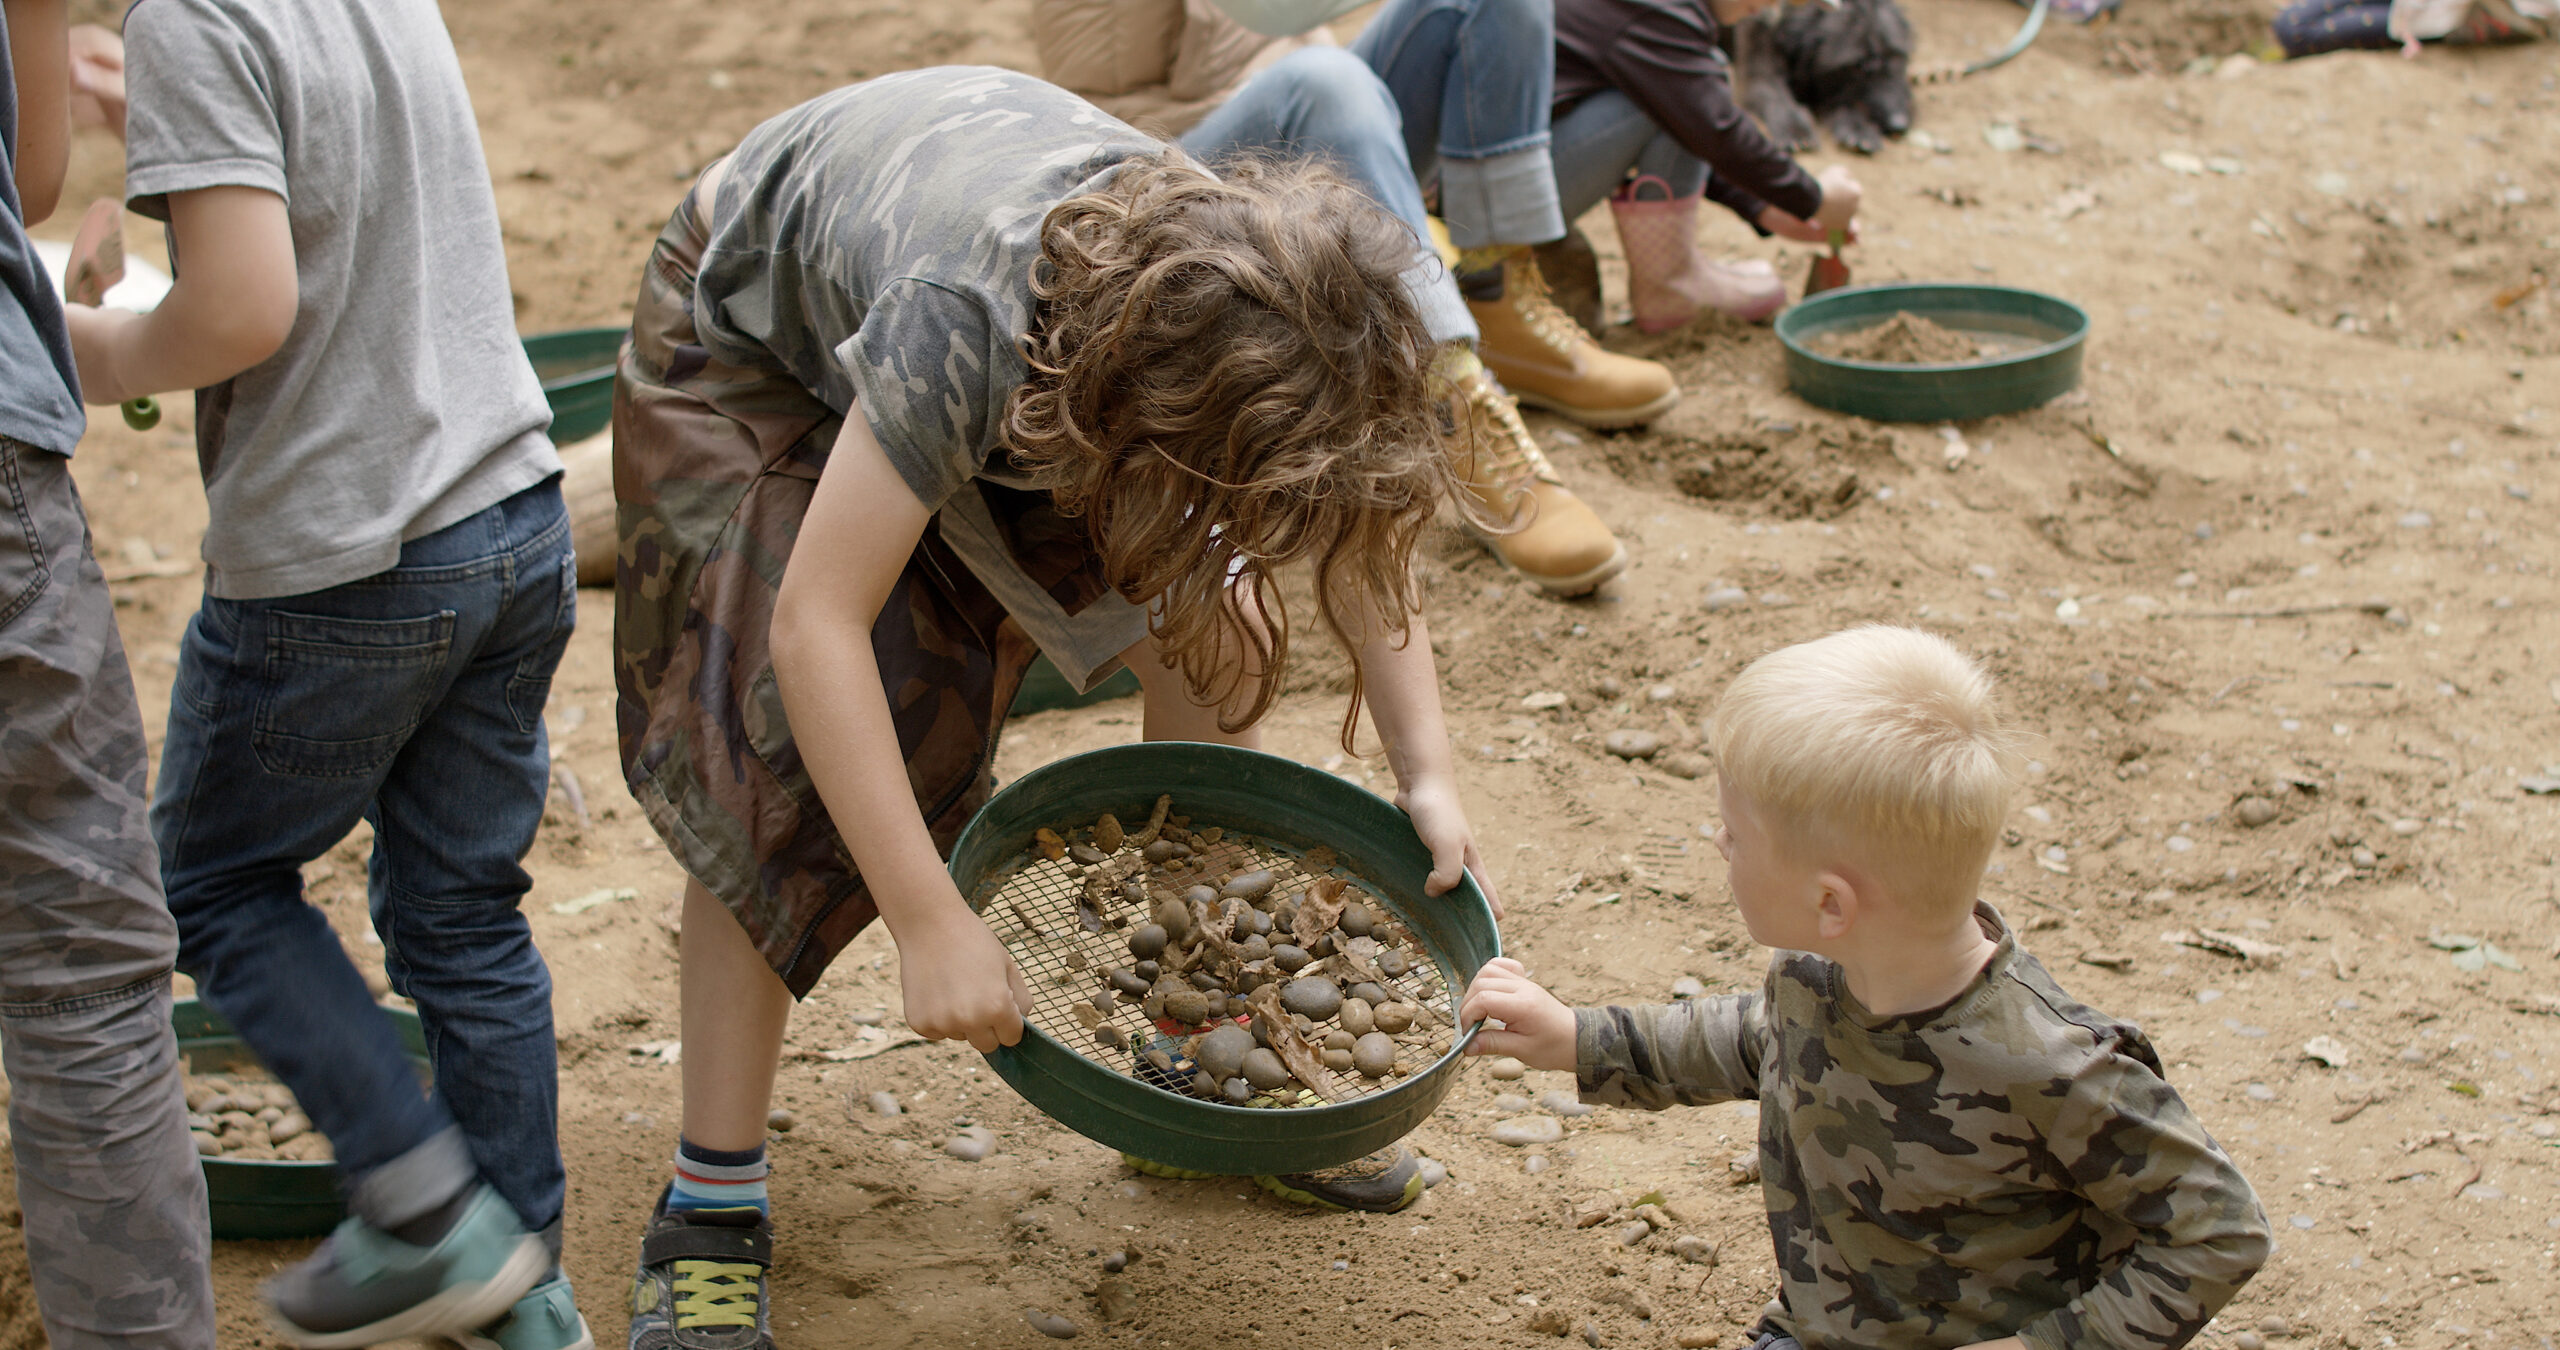 Sieving for fossils in the fossil pit